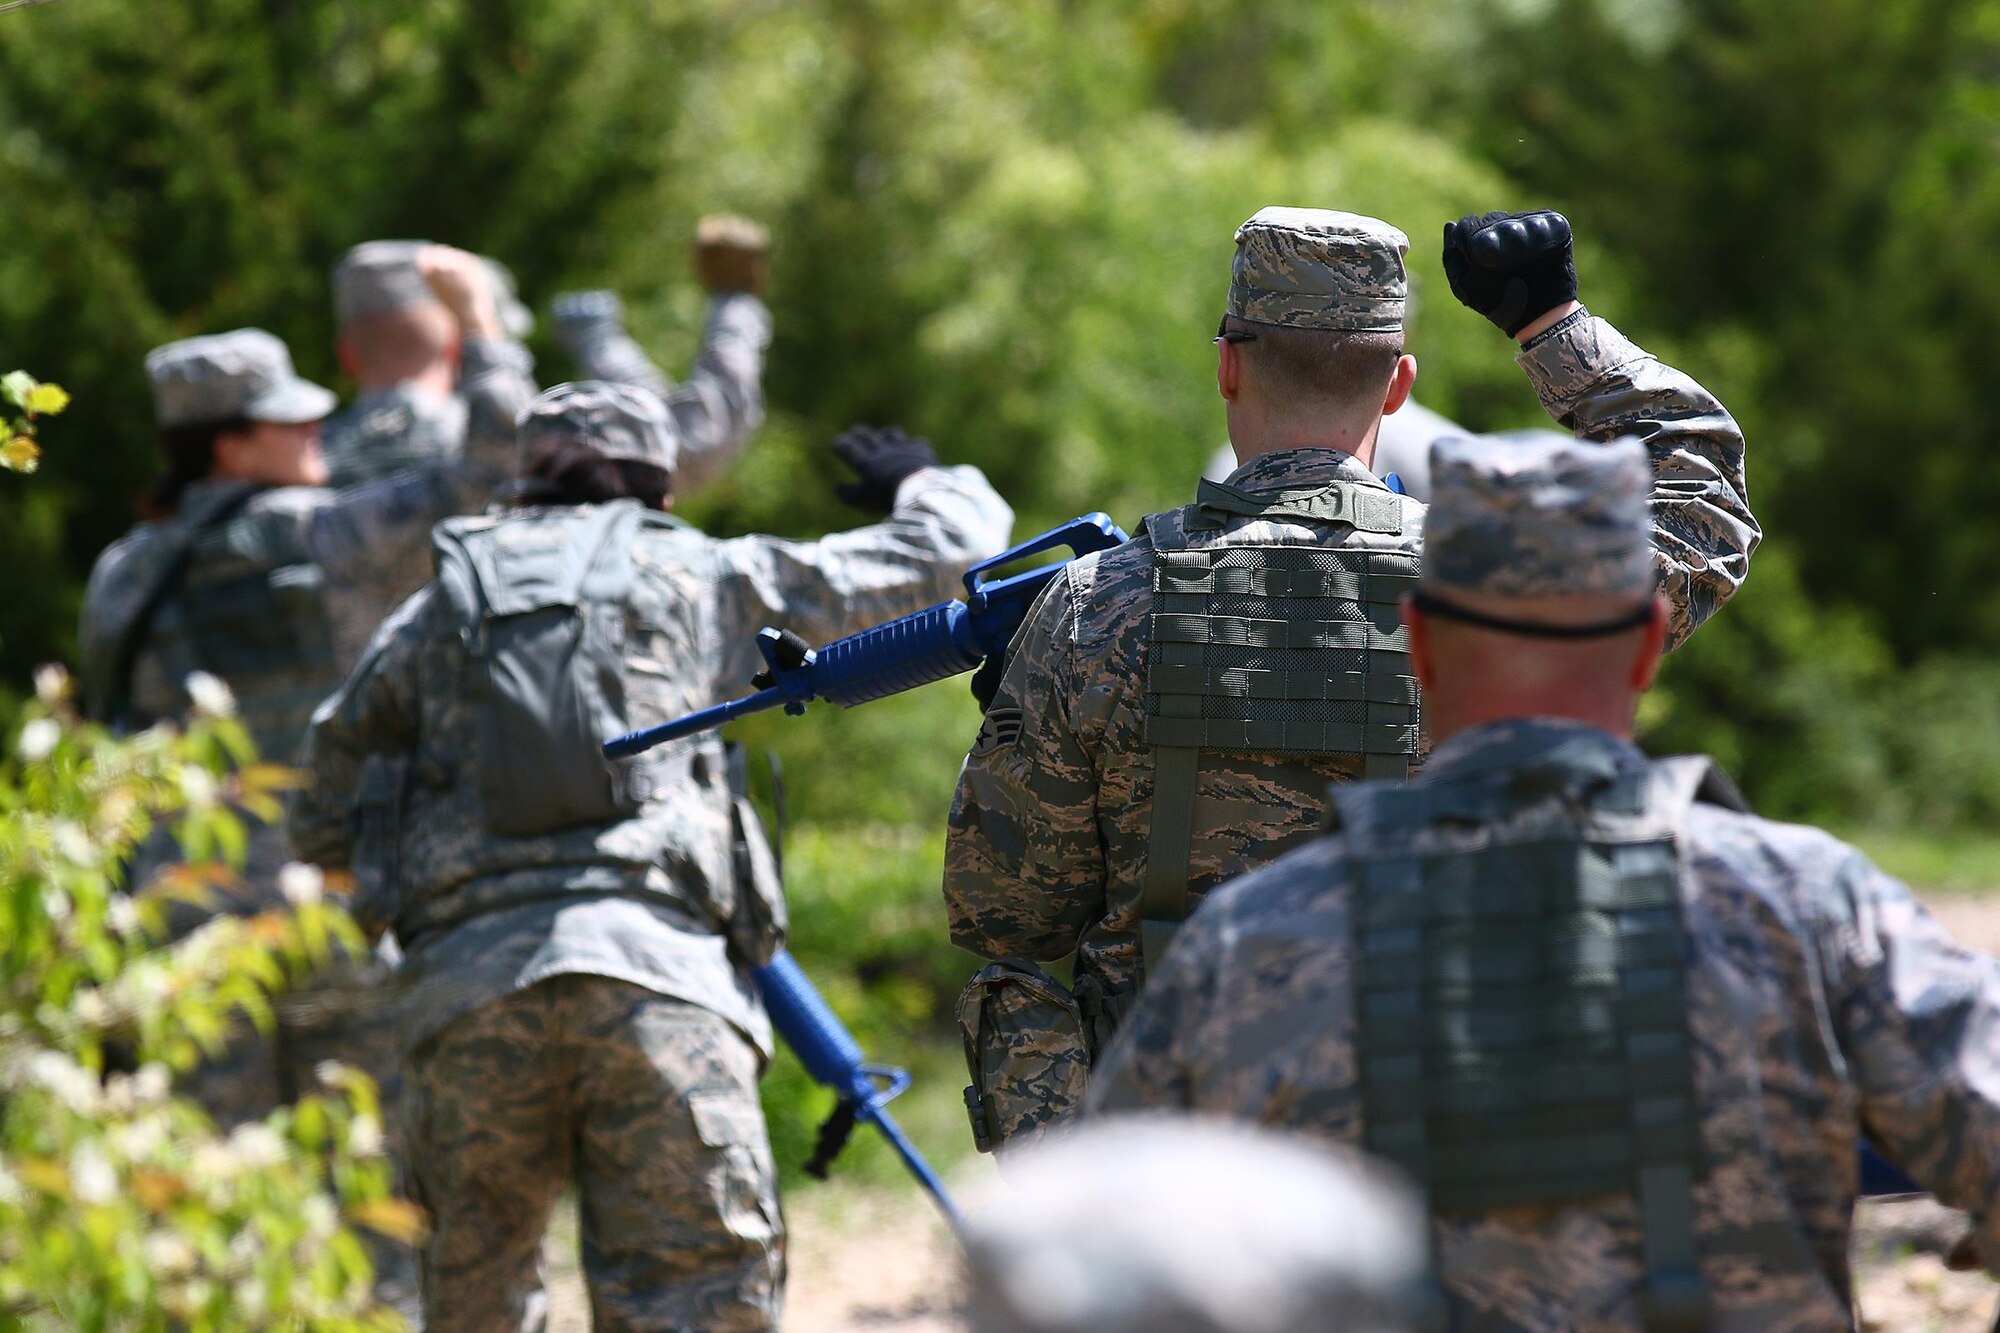 Members of the 445th Security Forces Squadron execute hand signals during ‘dismount’ training at the Oakes Quarry Park, Fairborn, Ohio May 6, 2017. The three-day expeditionary training consisted of several phases to include: Humvee mount/dismount, SERE, setting up/tear down tents, and night vision goggles. (U.S. Air Force photo /Tech. Sgt. Patrick O’Reilly)